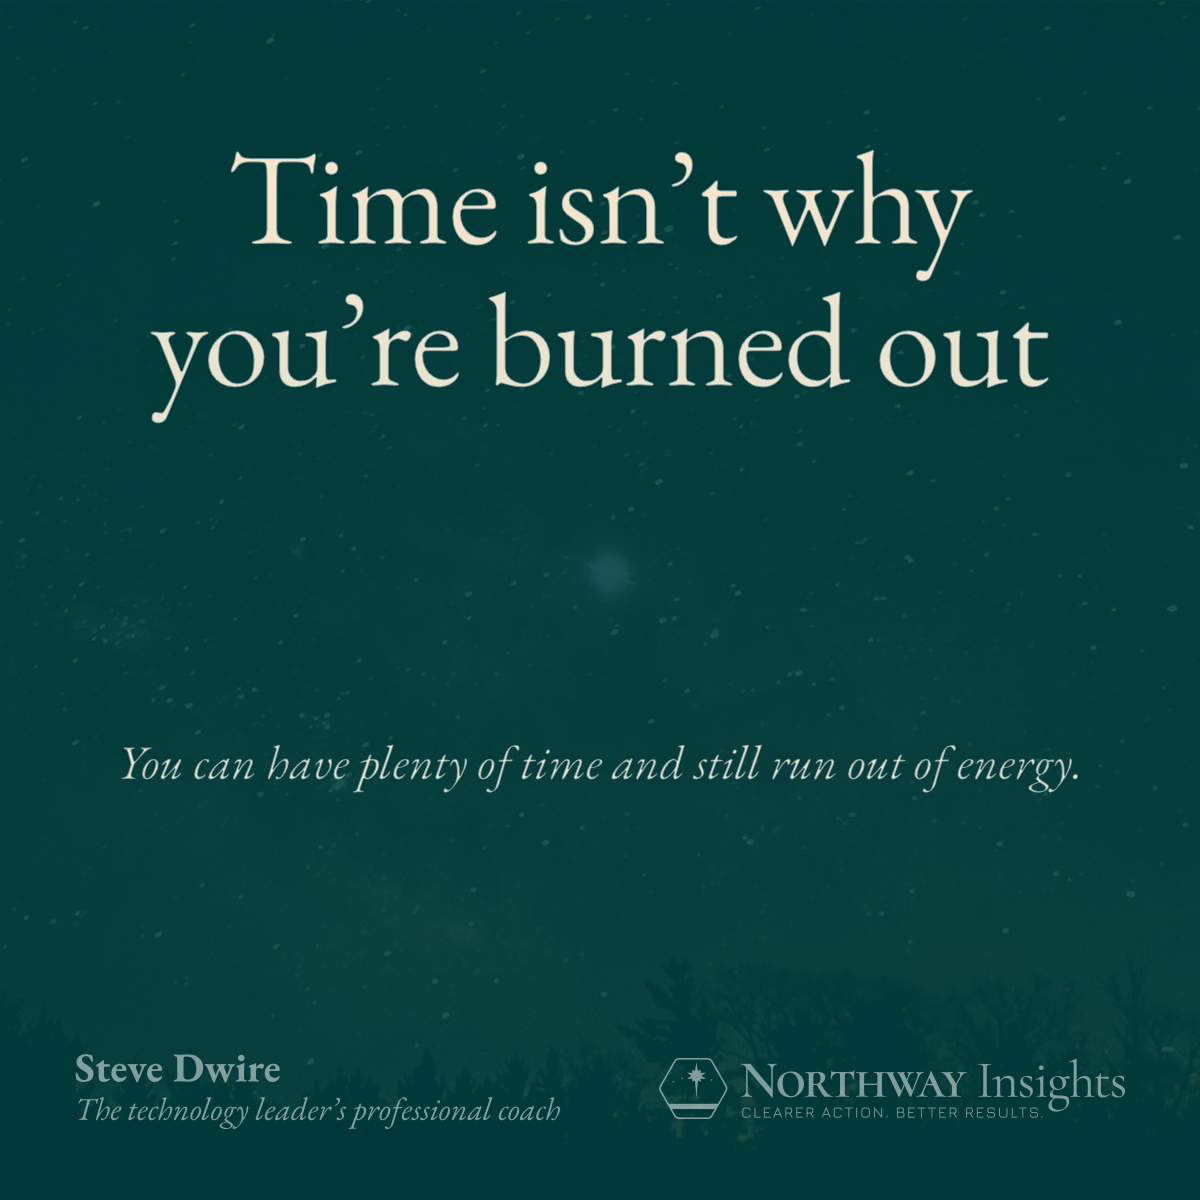 Time isn’t why you’re burned out